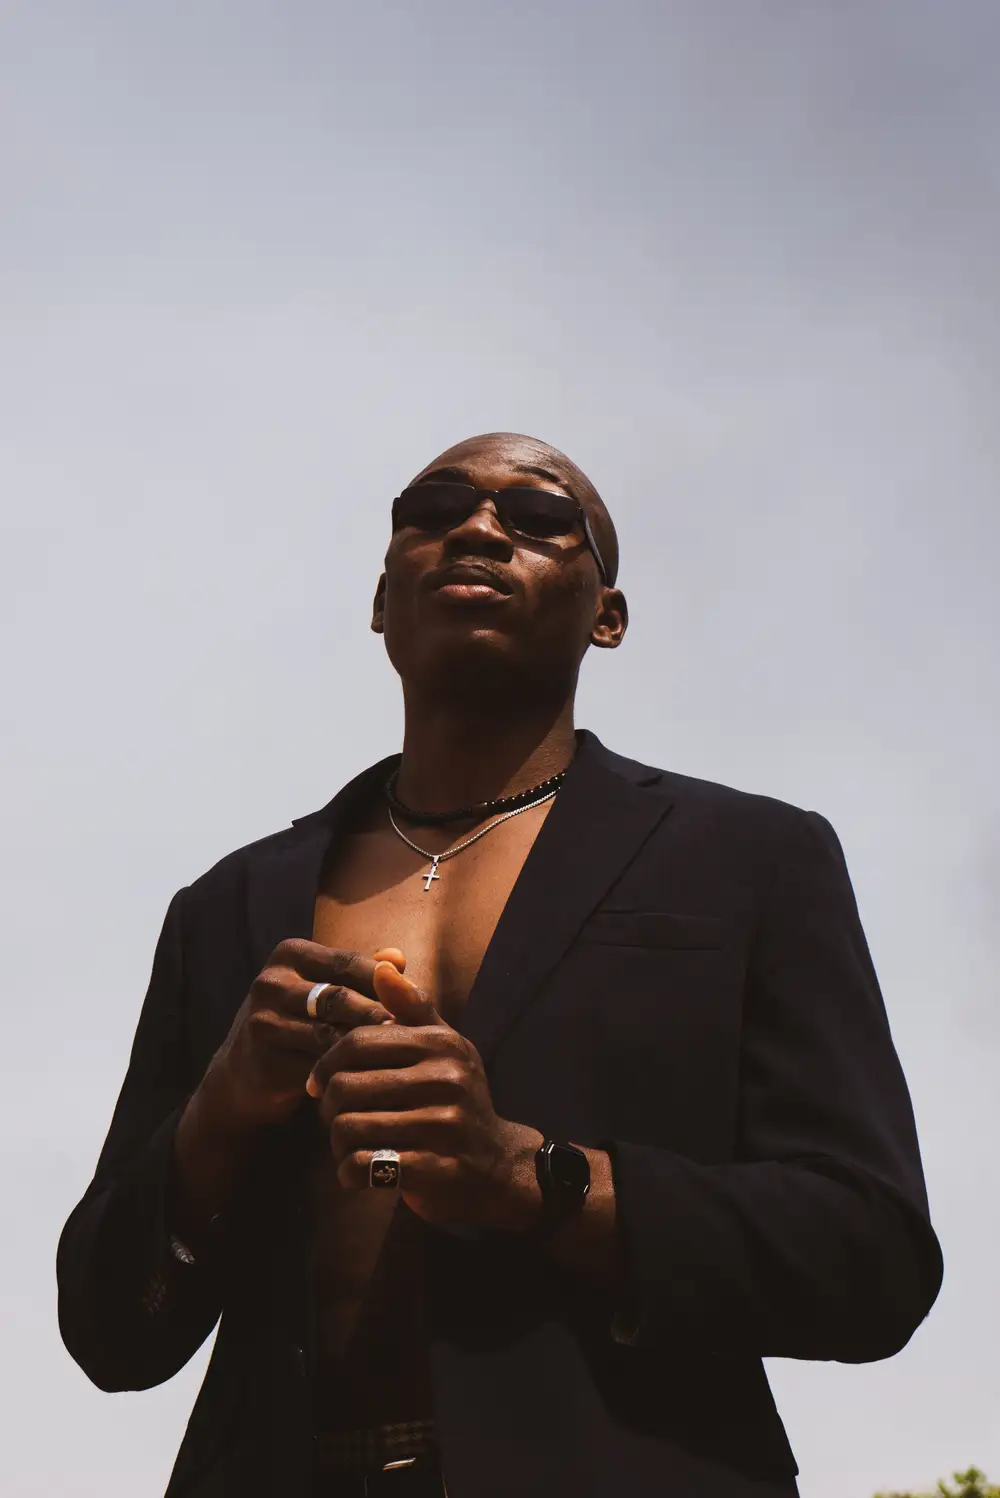 Bare chested black man in cool suit